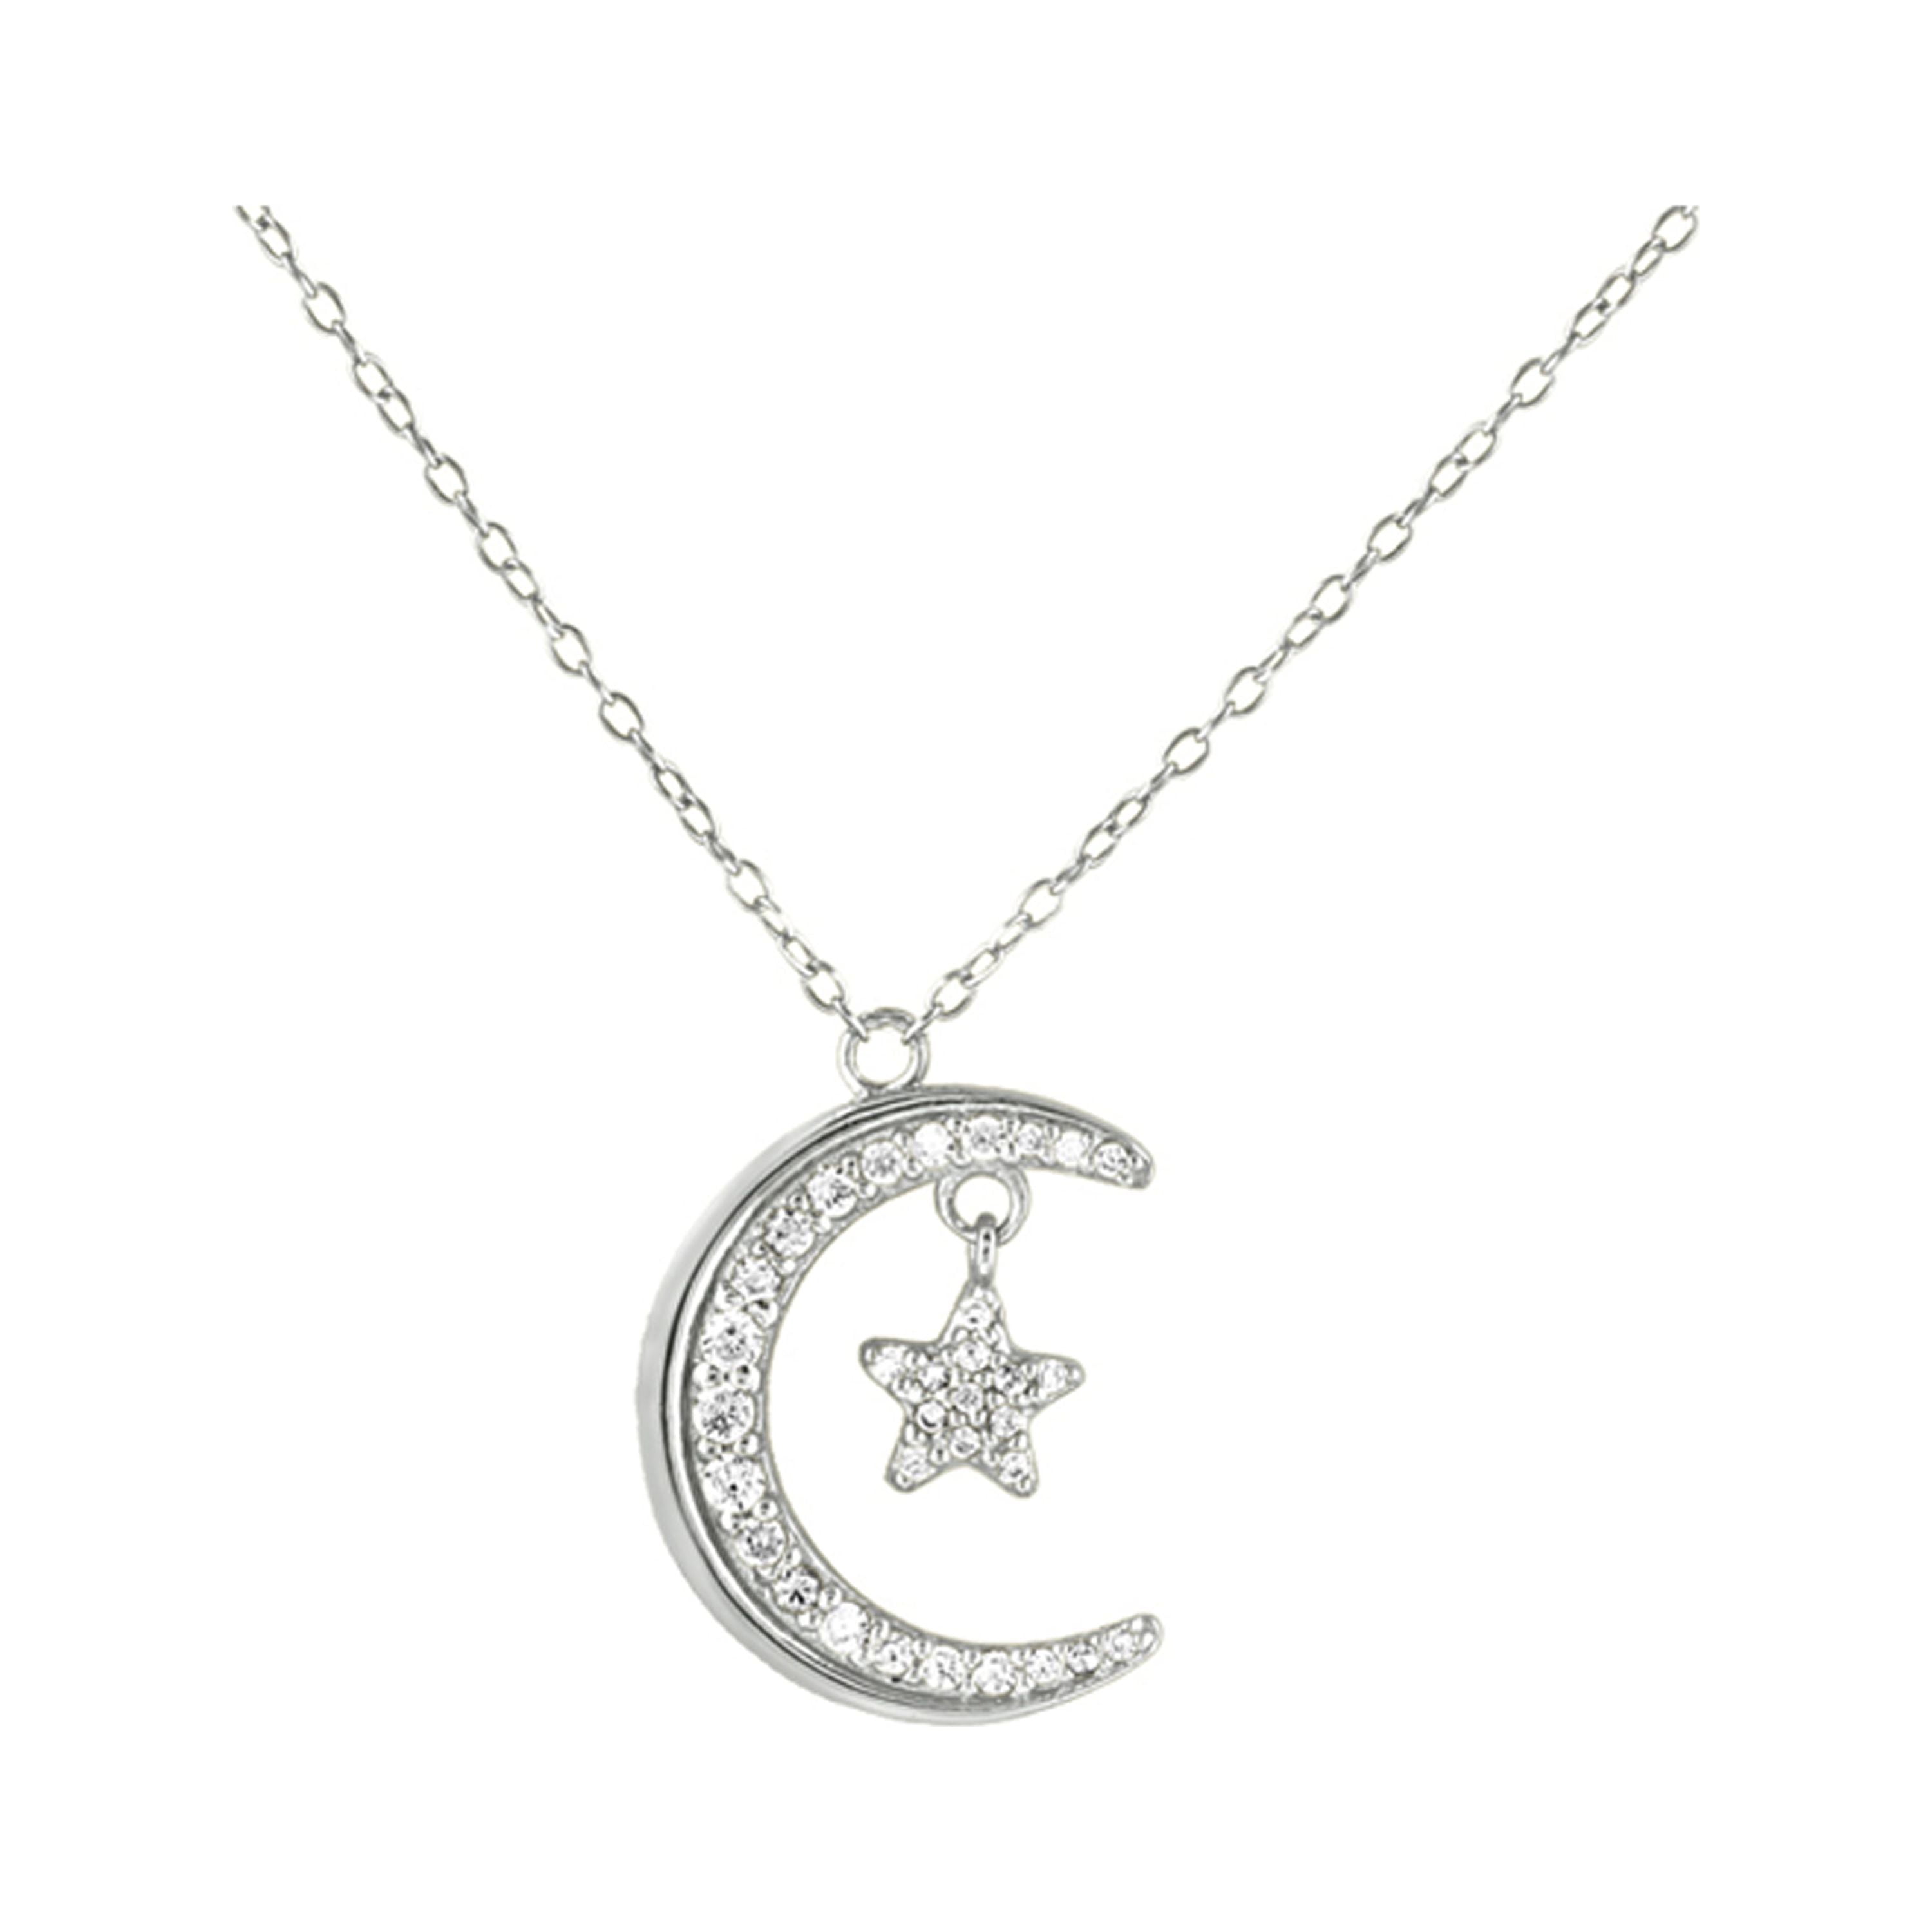 CZ Crescent Moon and Star Pendant Necklace in 925 Sterling Silver ...